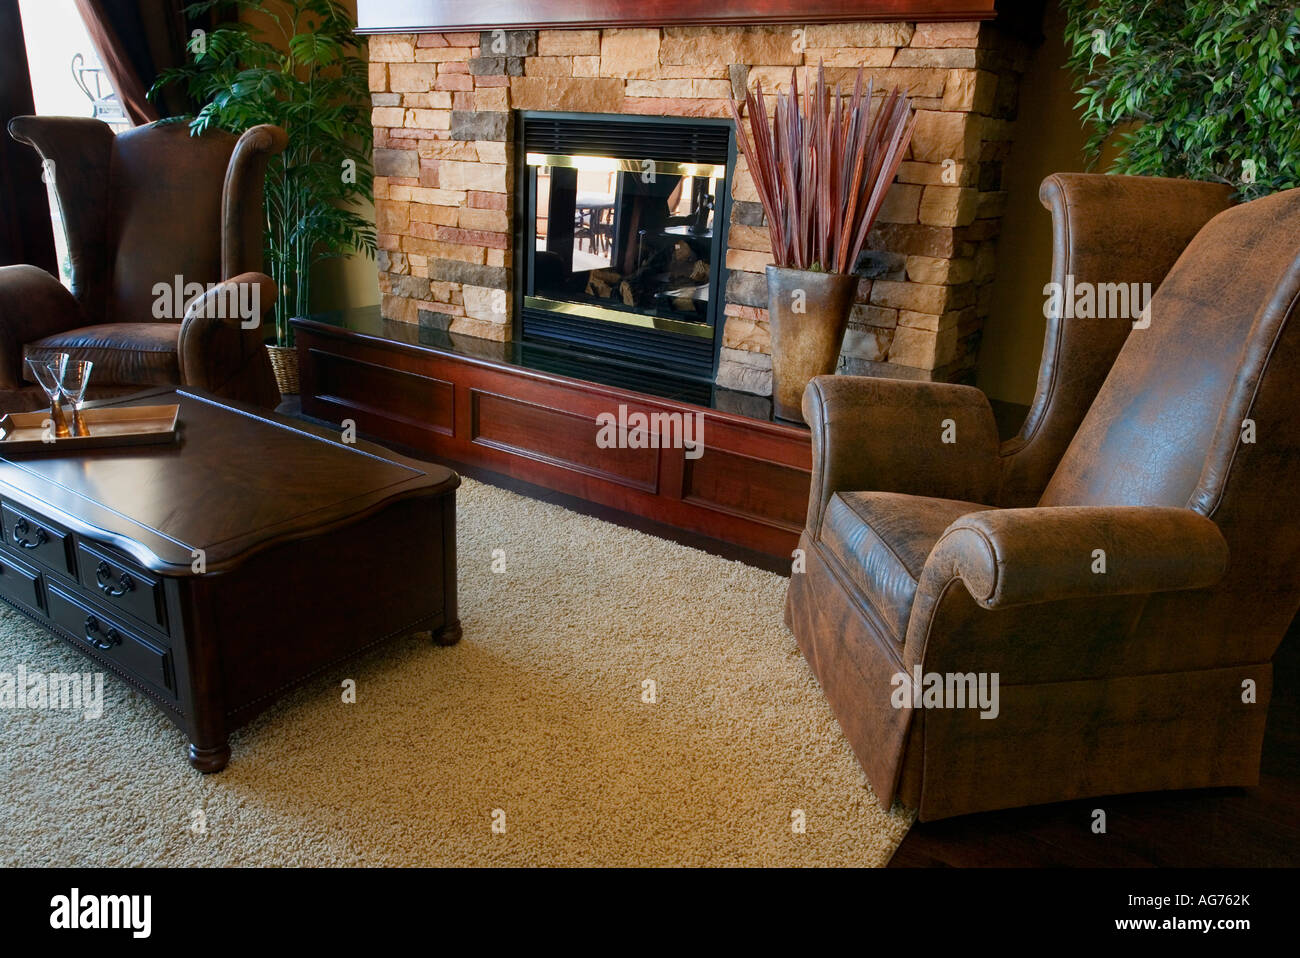 Interior of a living room Stock Photo